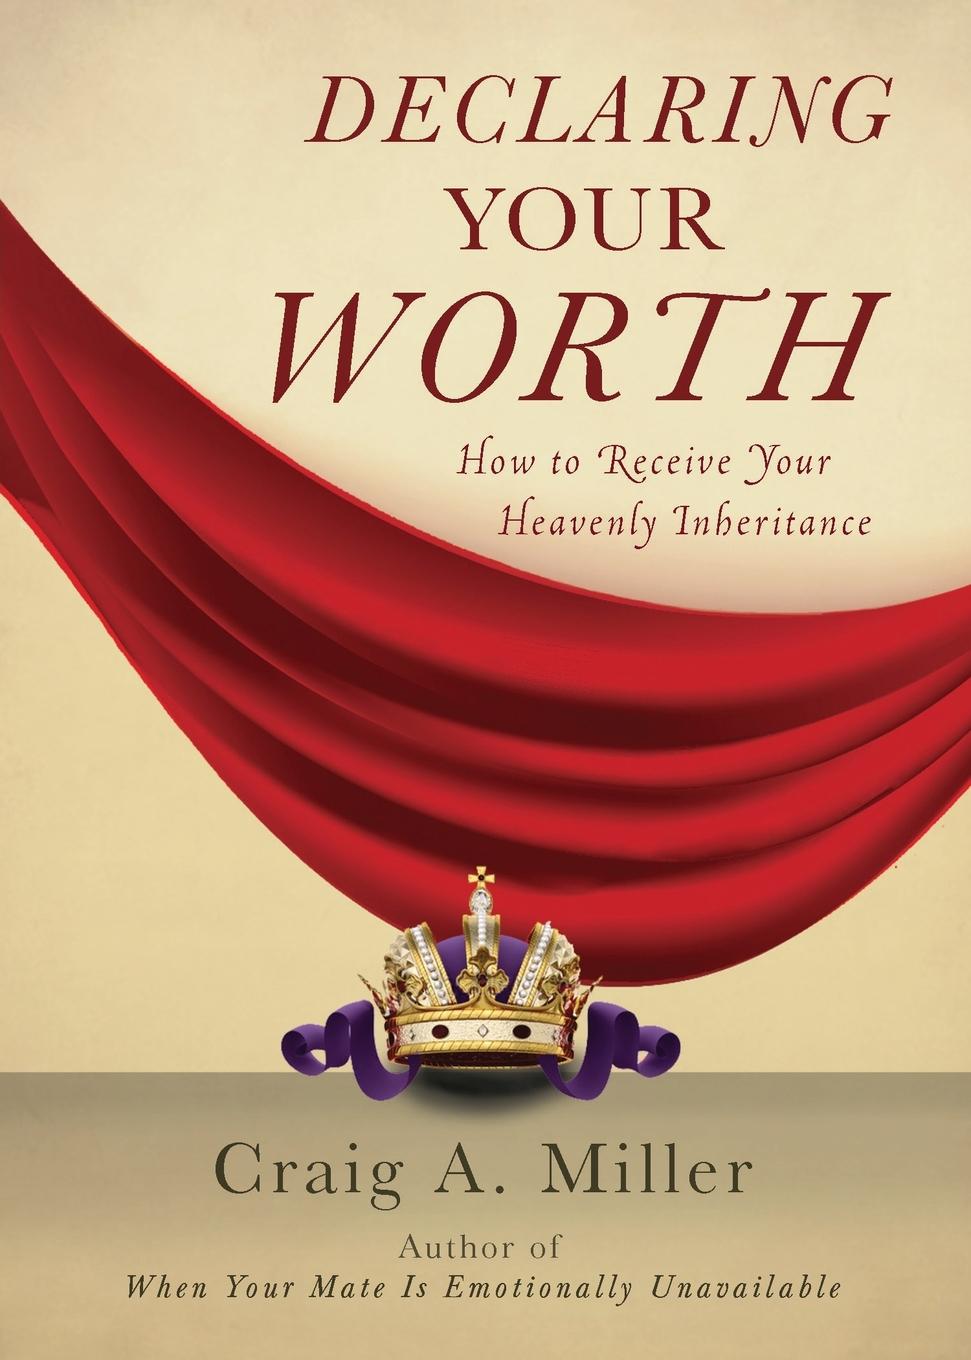 Declaring Your Worth. How to Receive Your Heavenly Inheritance